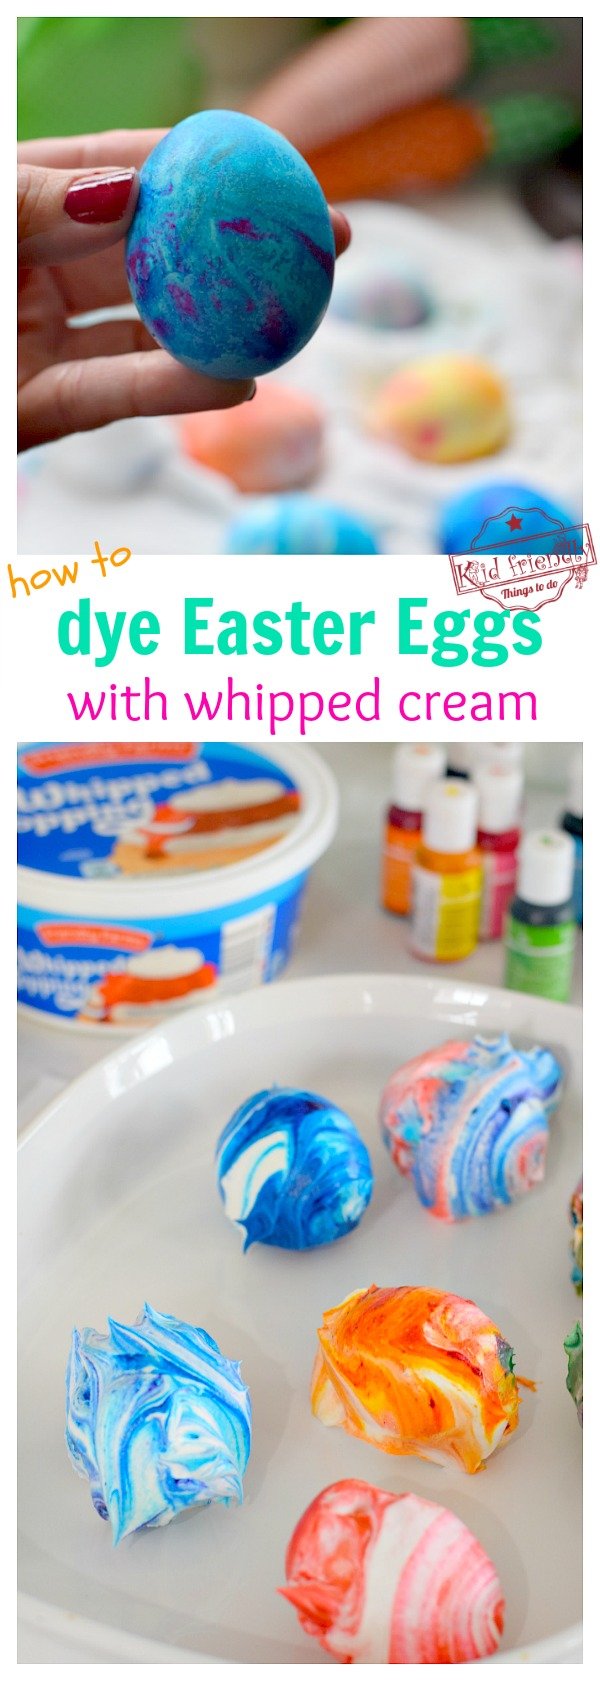 dye Easter Eggs with whipped cream